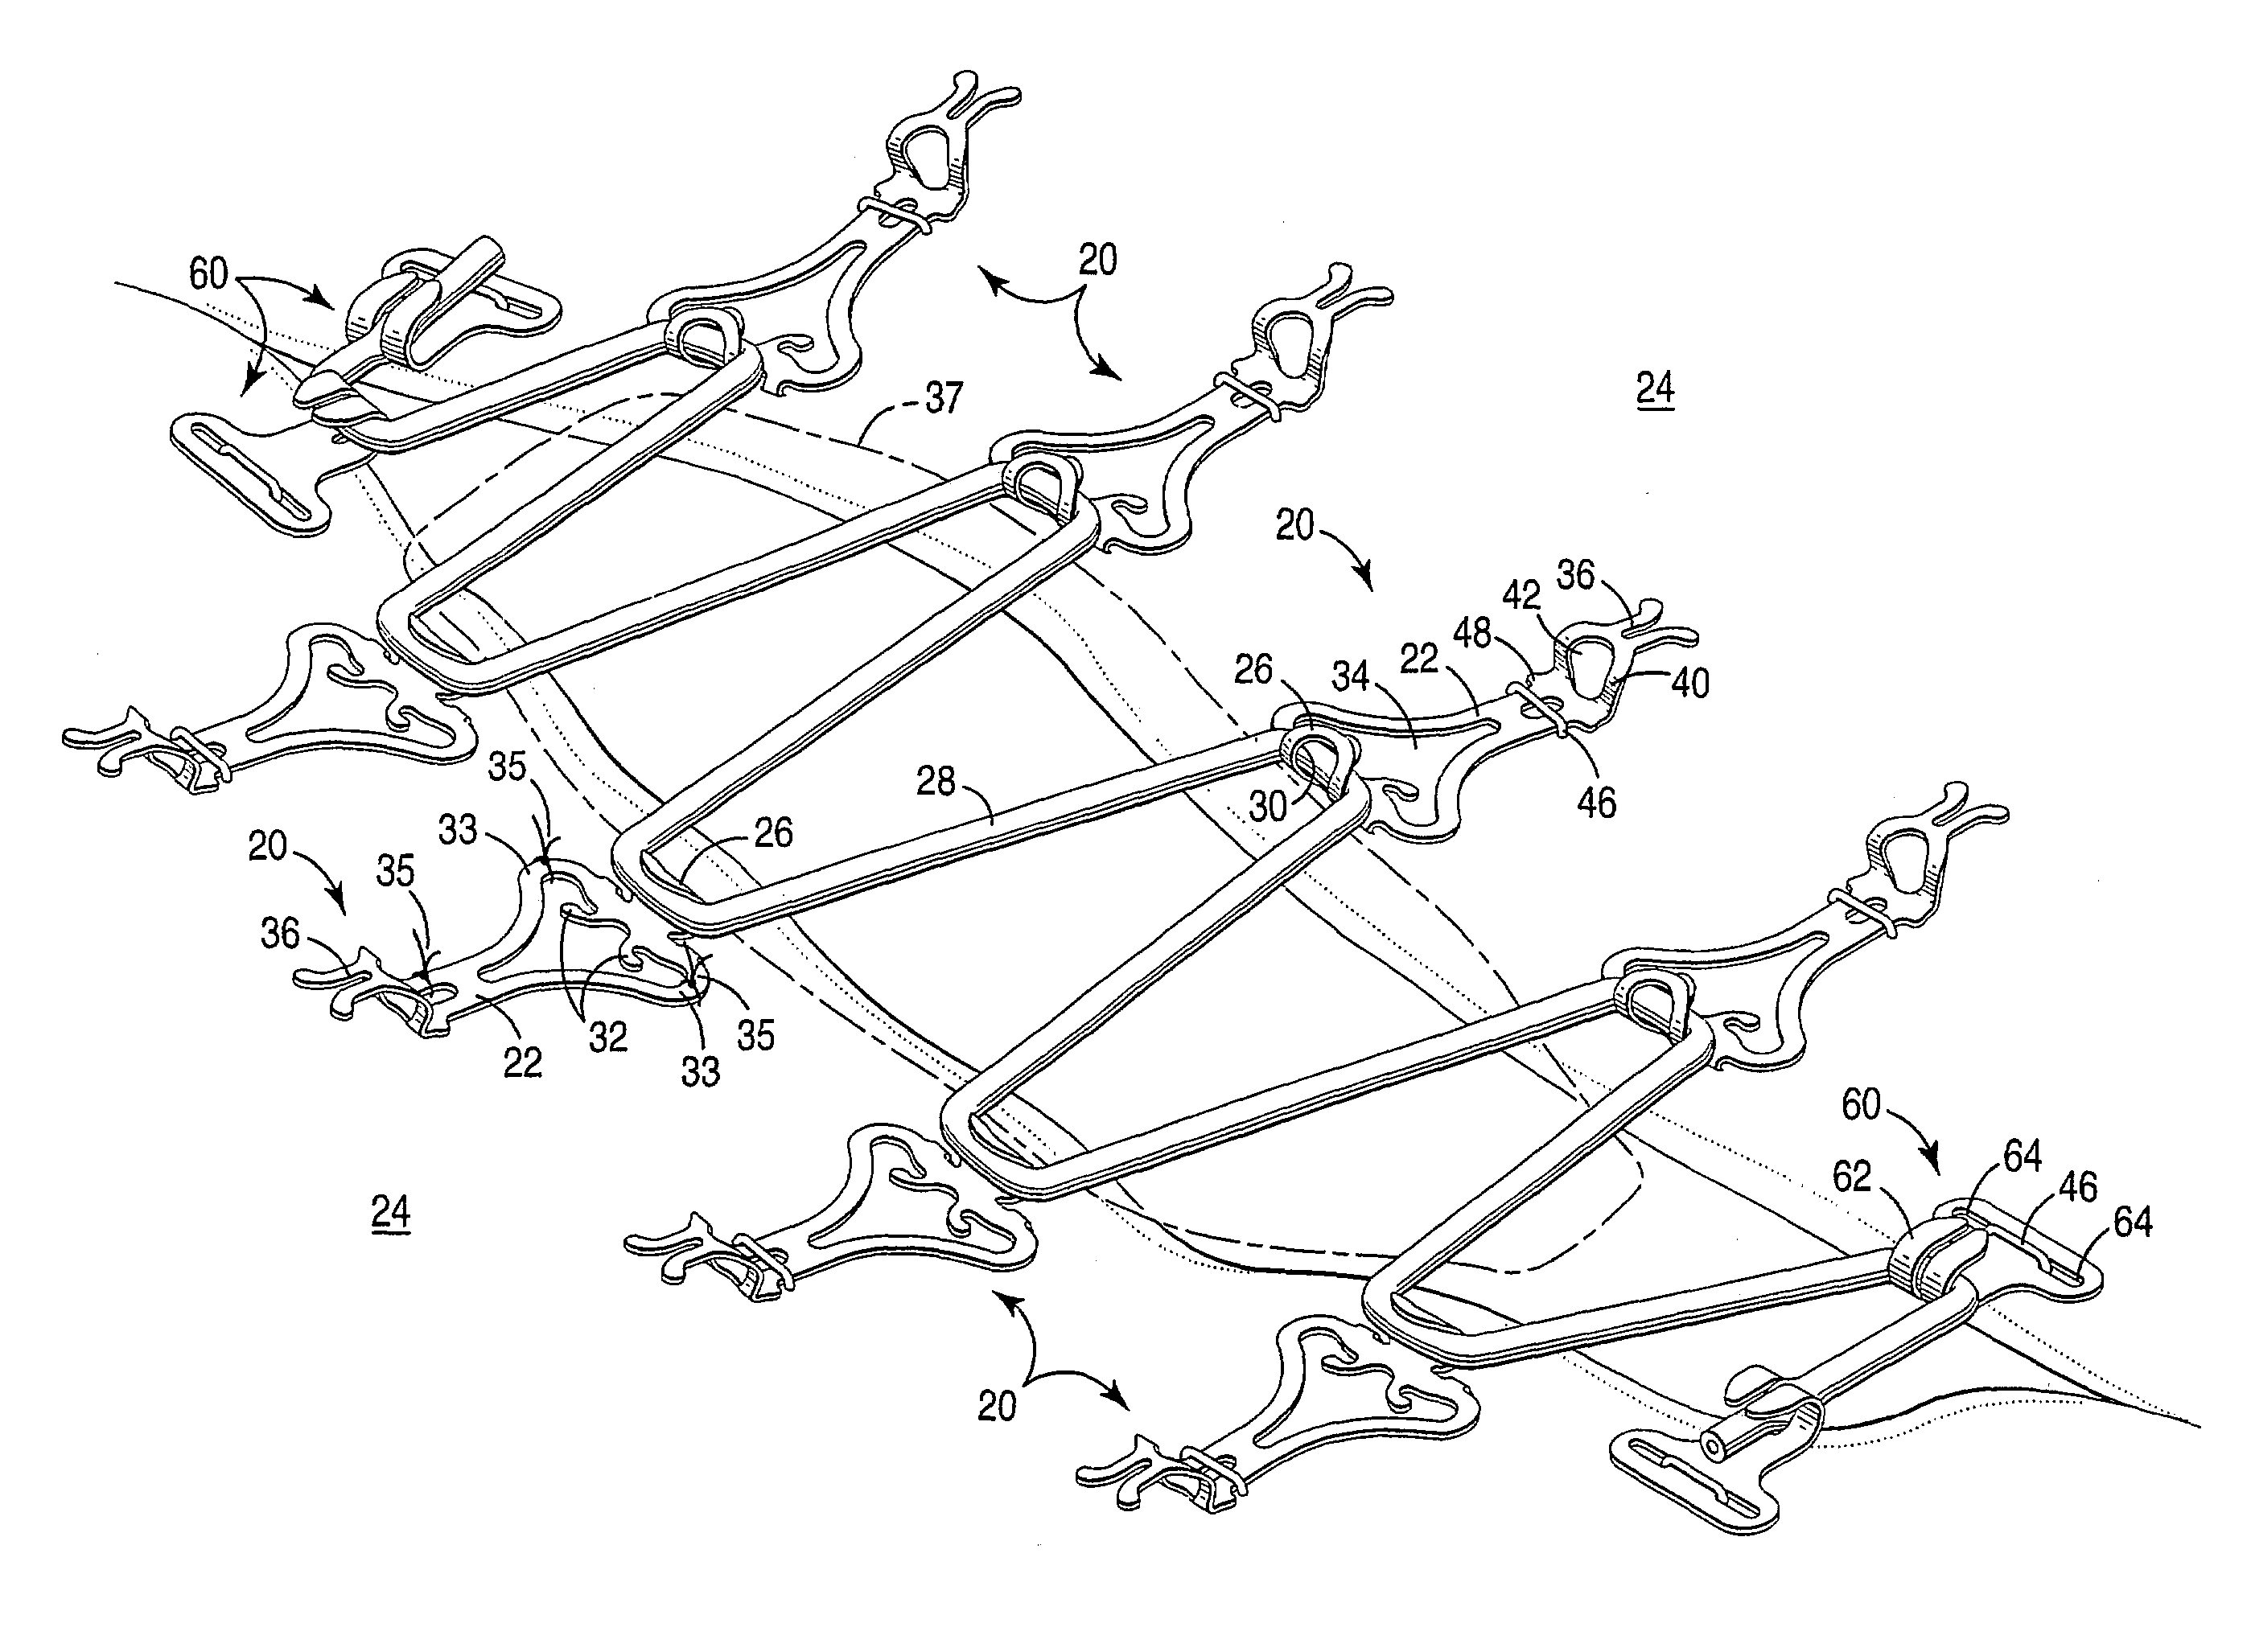 System and method for moving and stretching plastic tissue